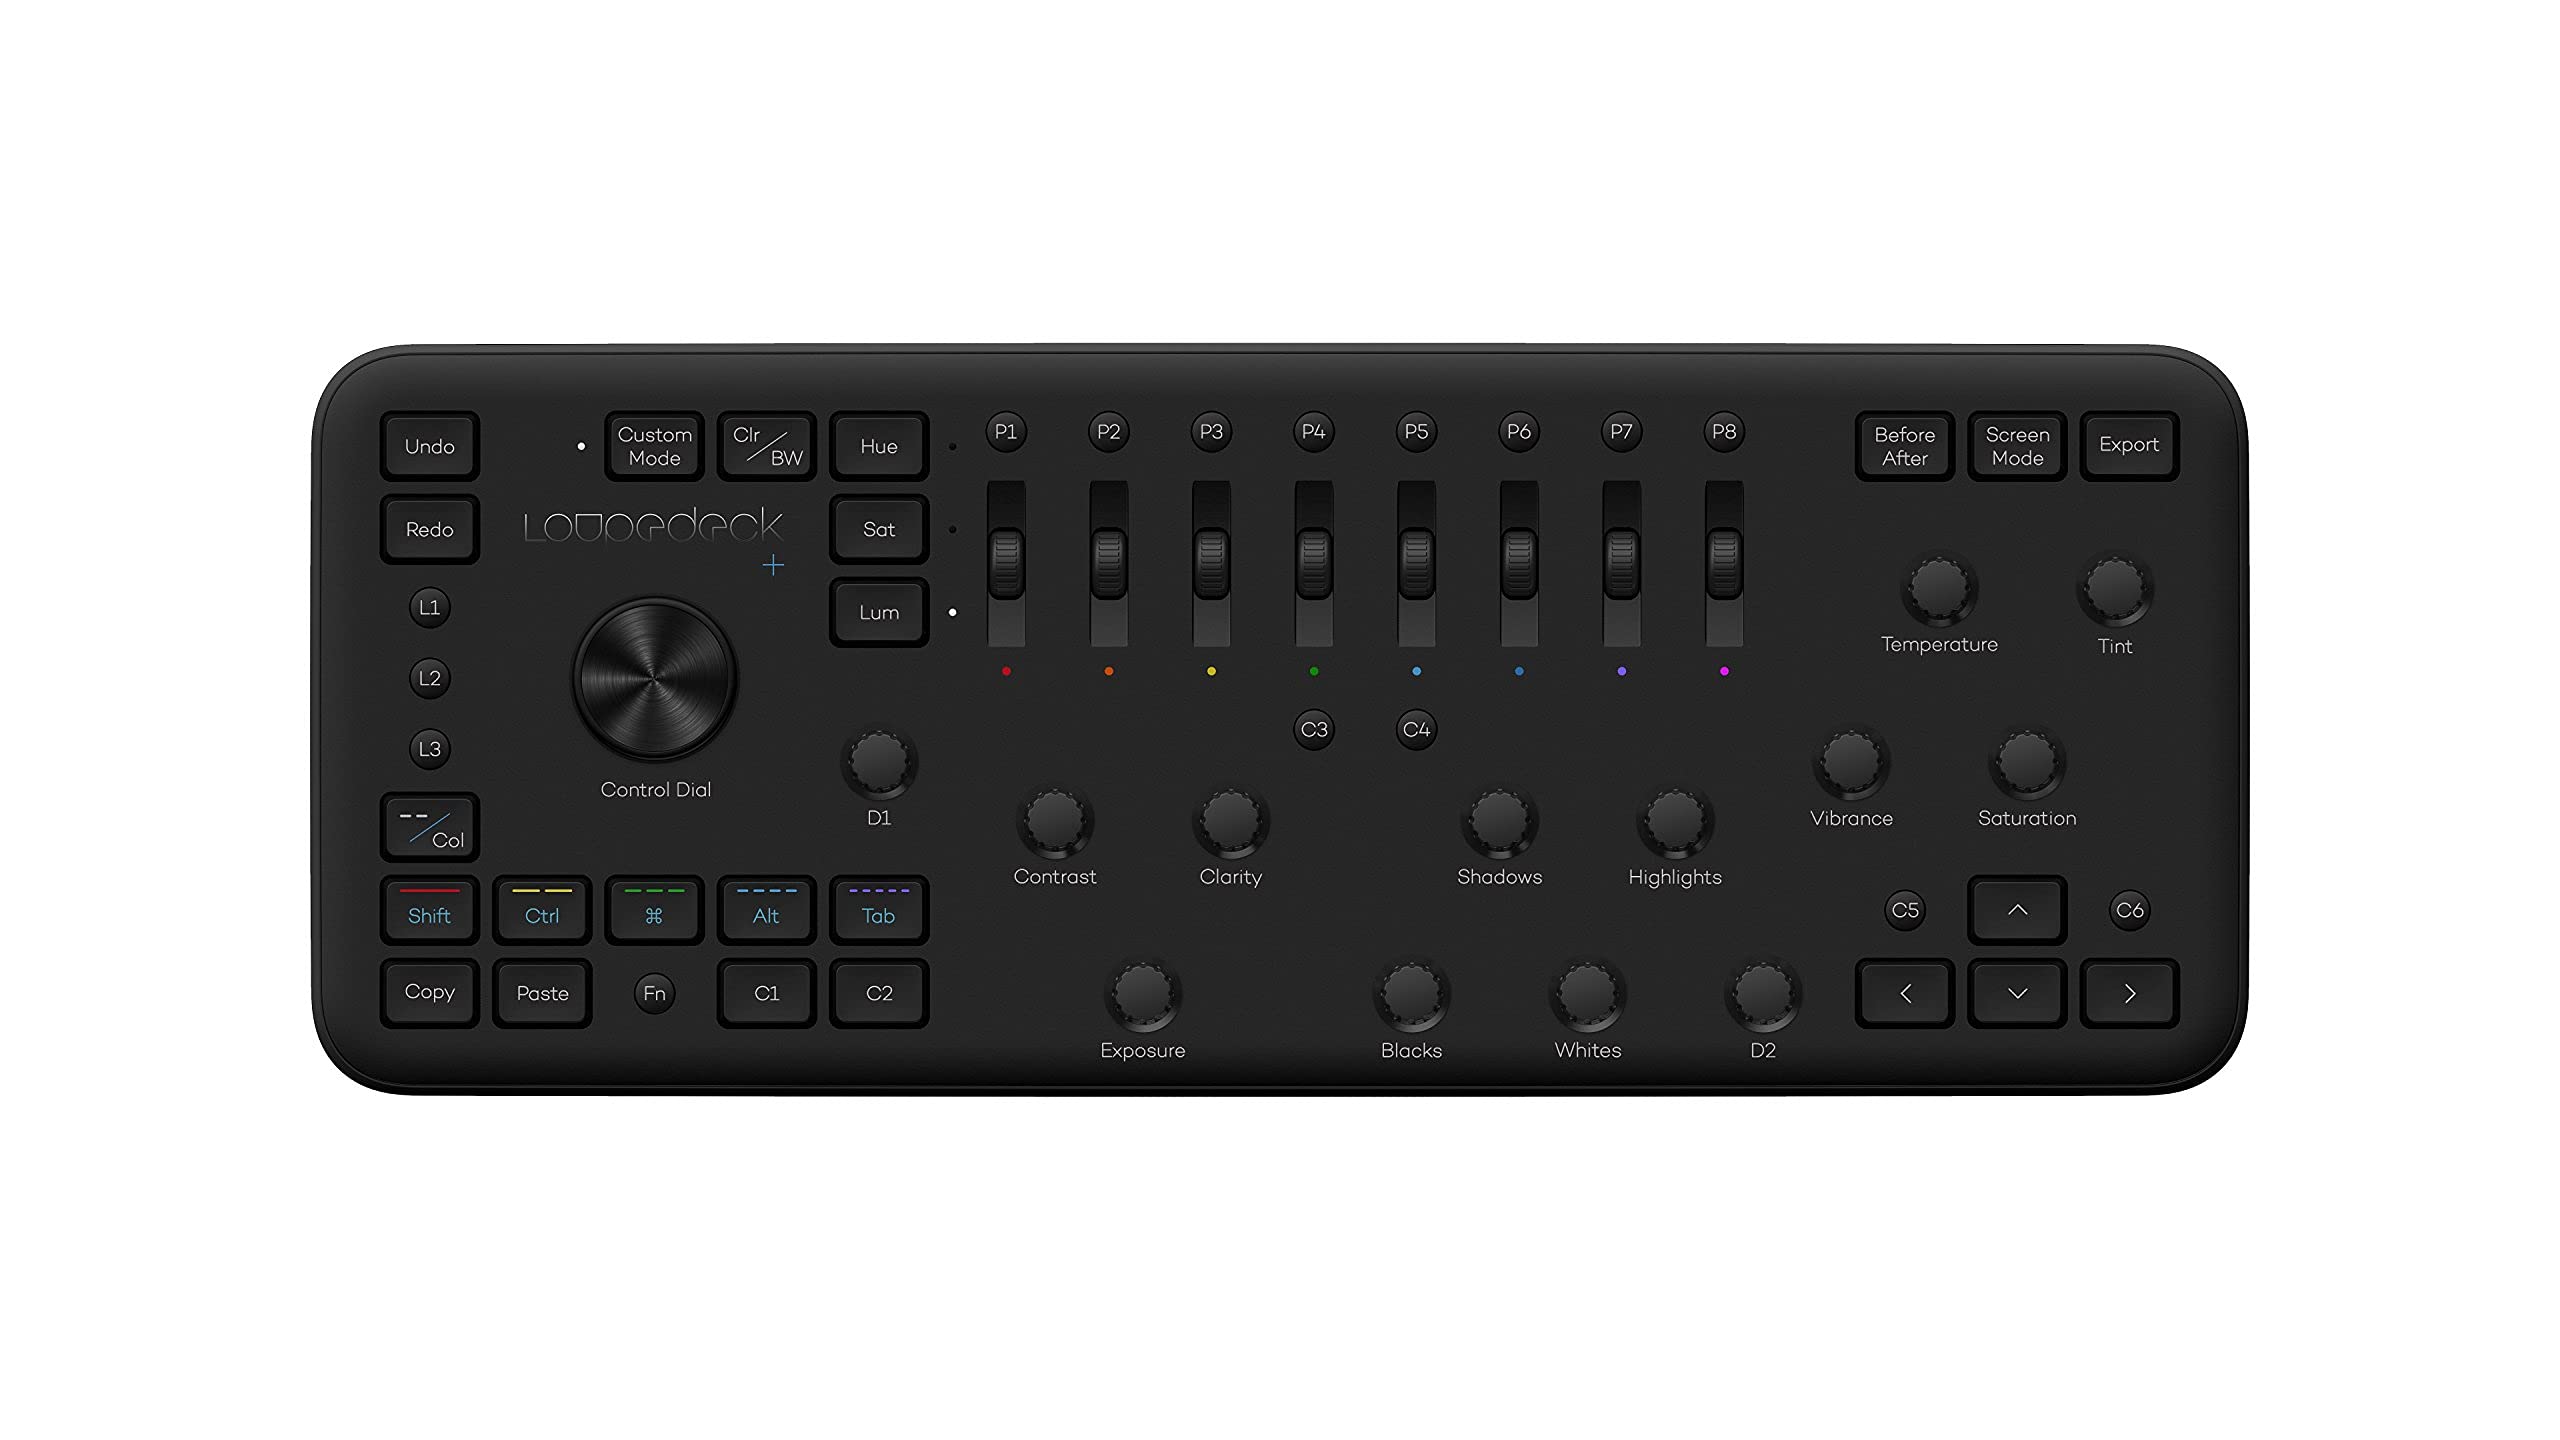 Loupedeck + The Photo and Video Editing Console for Lig...